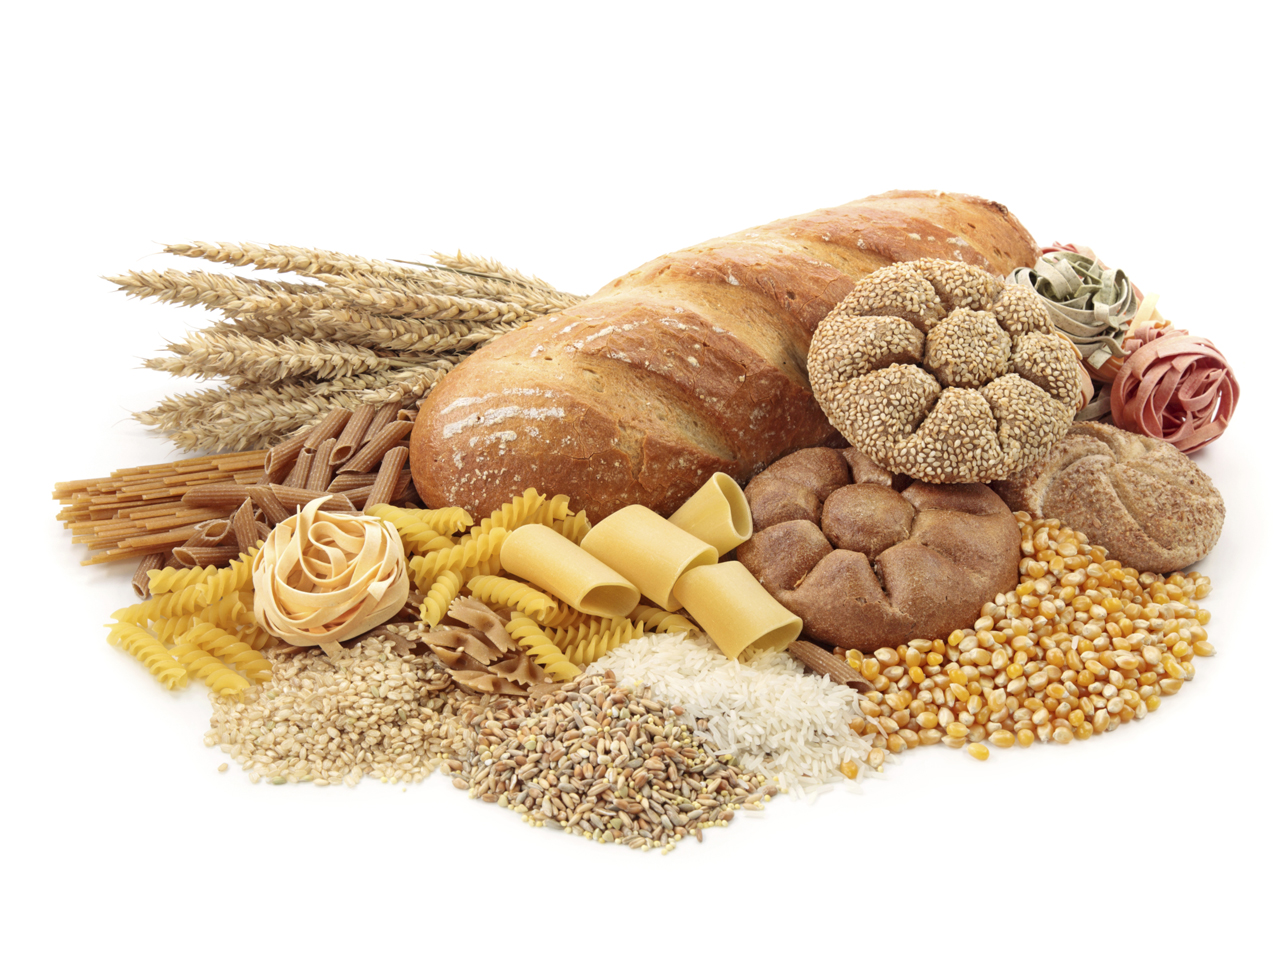 Foods high in carbohydrate